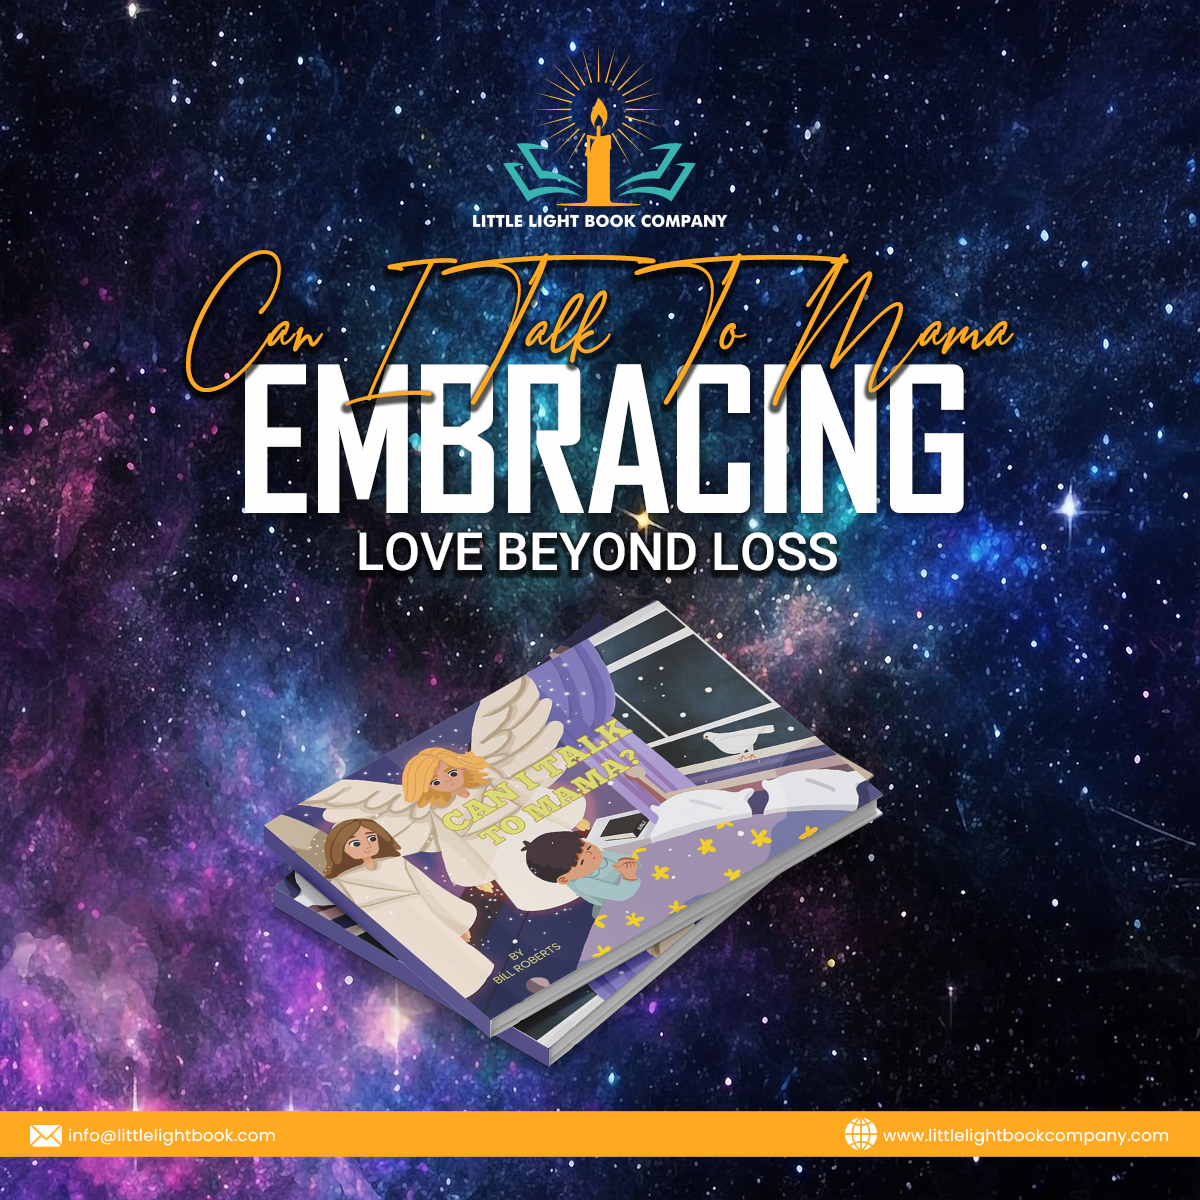 Explore the enduring bond in 'Can I Talk to Mama: Embracing Love Beyond Loss' from Little Light Book Company. Order now. 

Order now: littlelightbookcompany.com

#LittleLightBookCompany #CanITalkToMama #LoveBeyondLoss #GriefSupport #HealingJourney #LossAndLove #ComfortReading